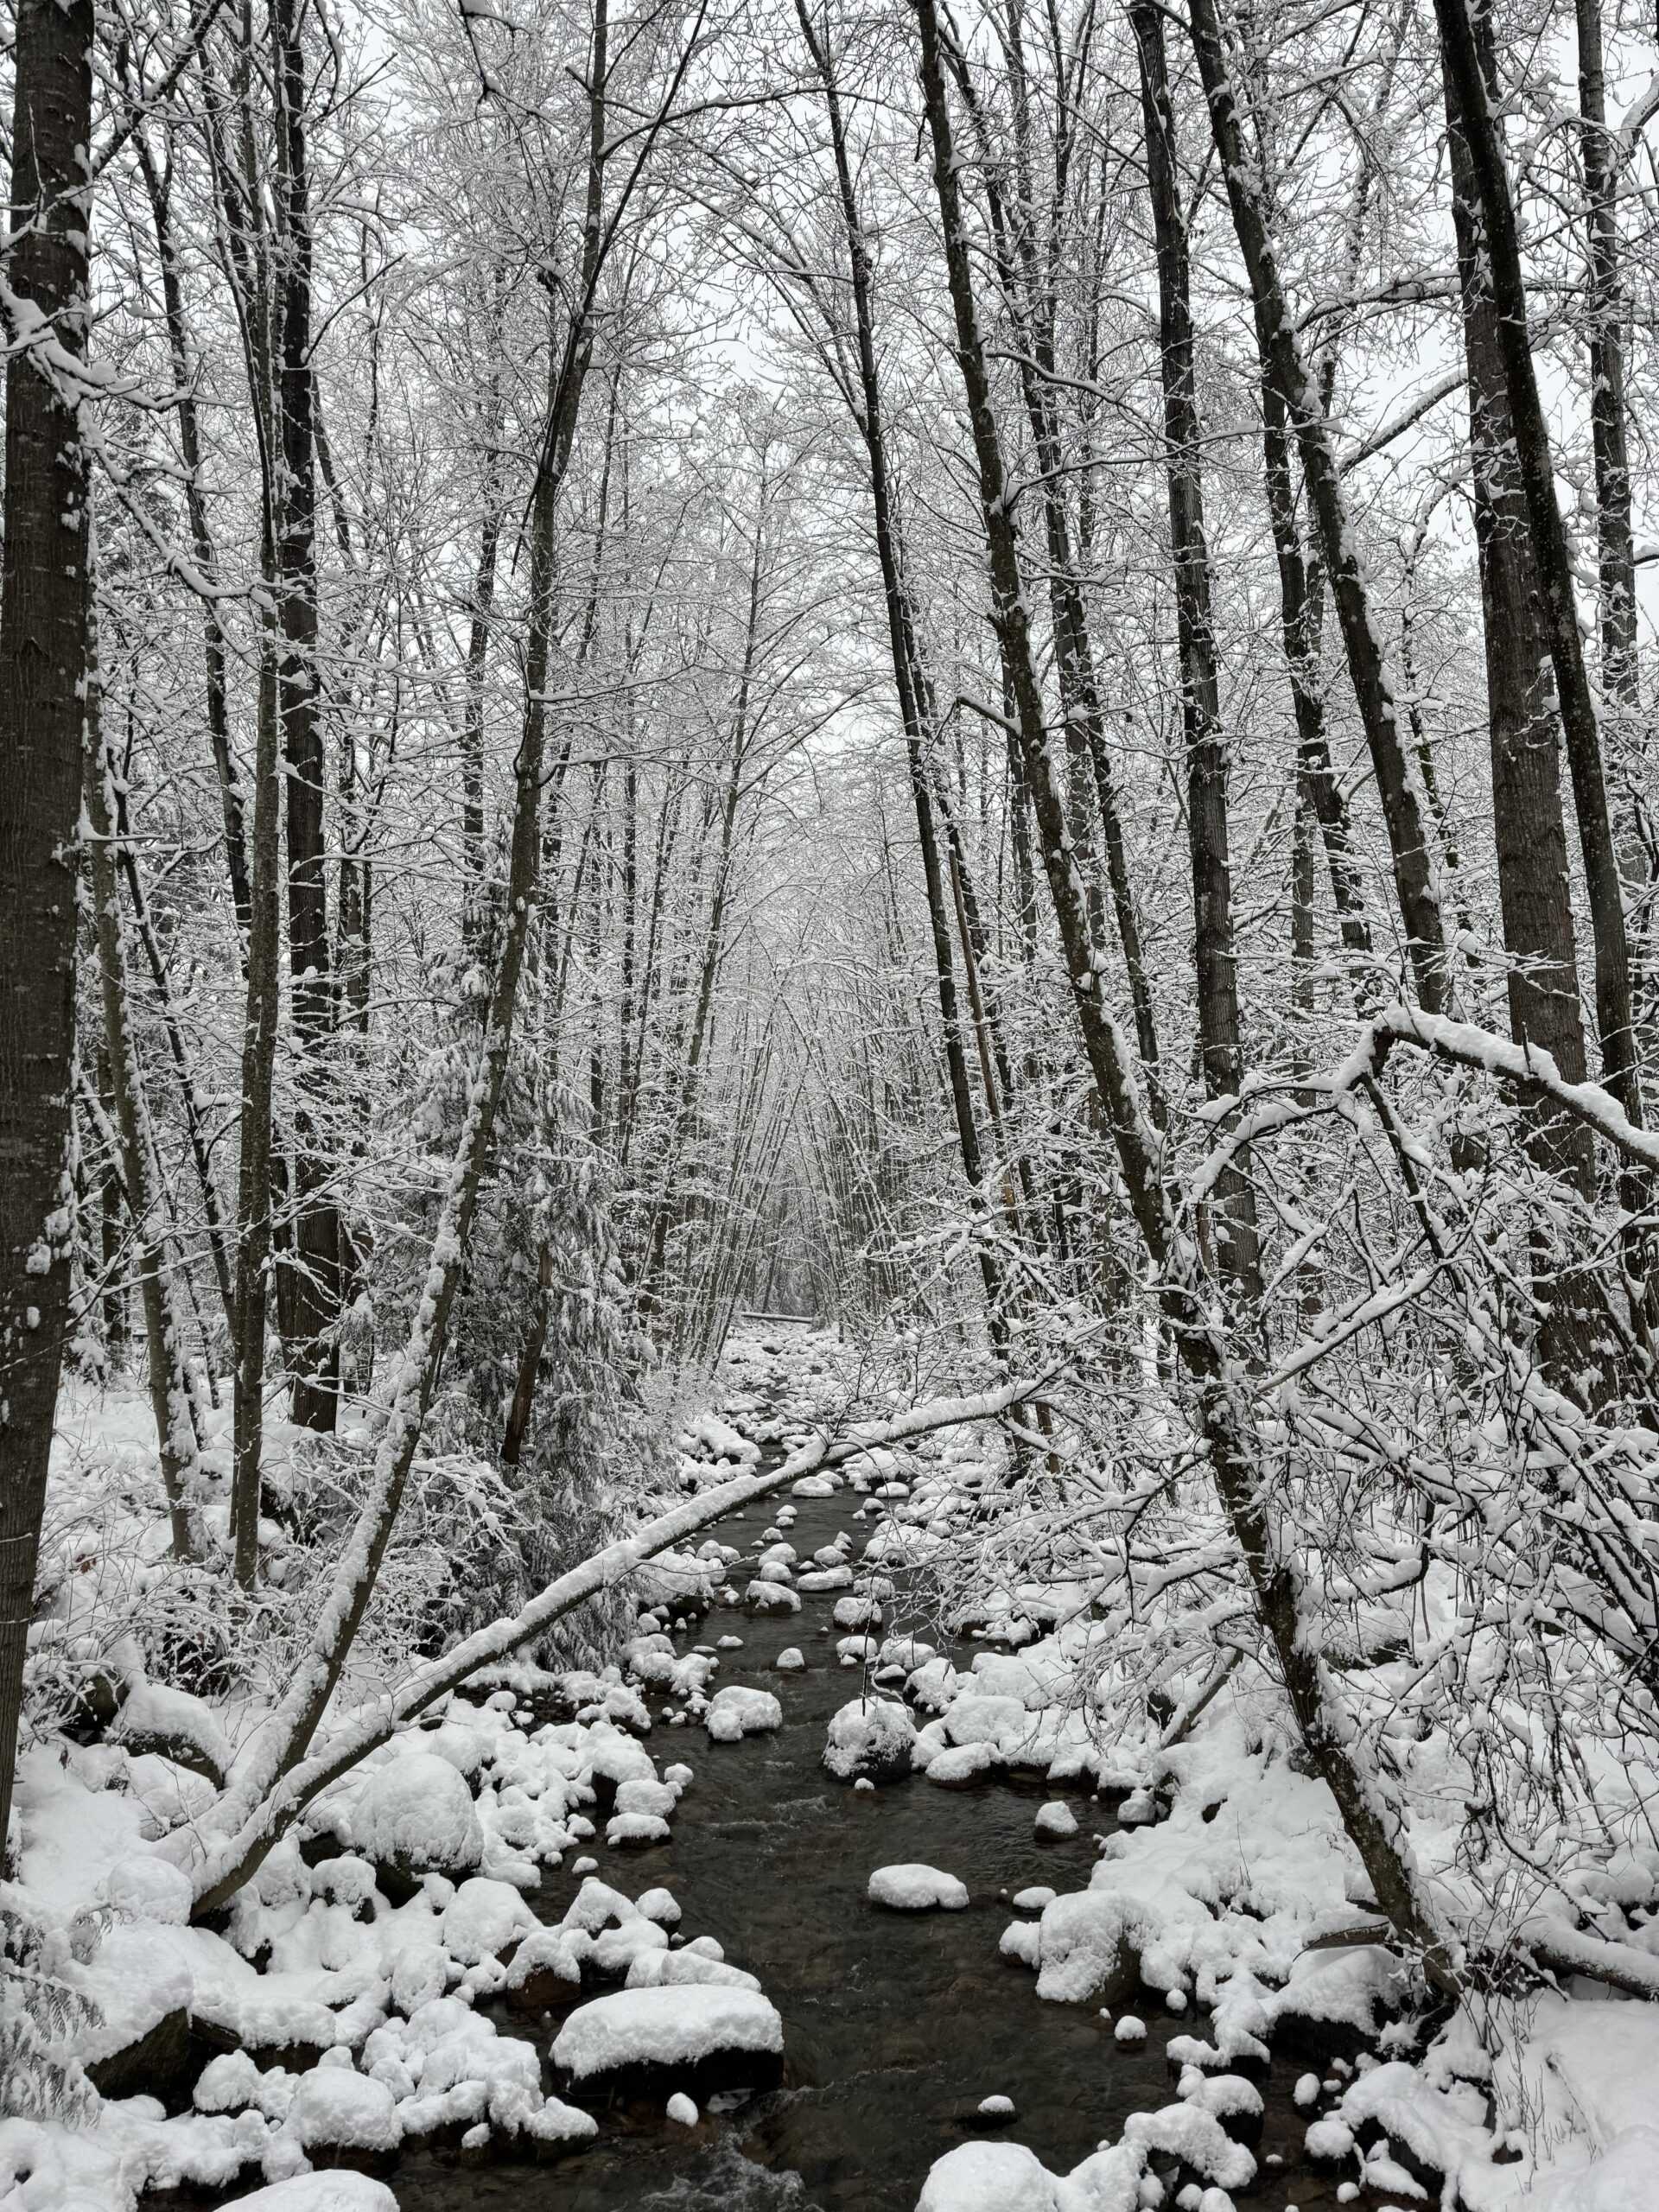 A snow covered creek runs between overarching rows of bare winter trees